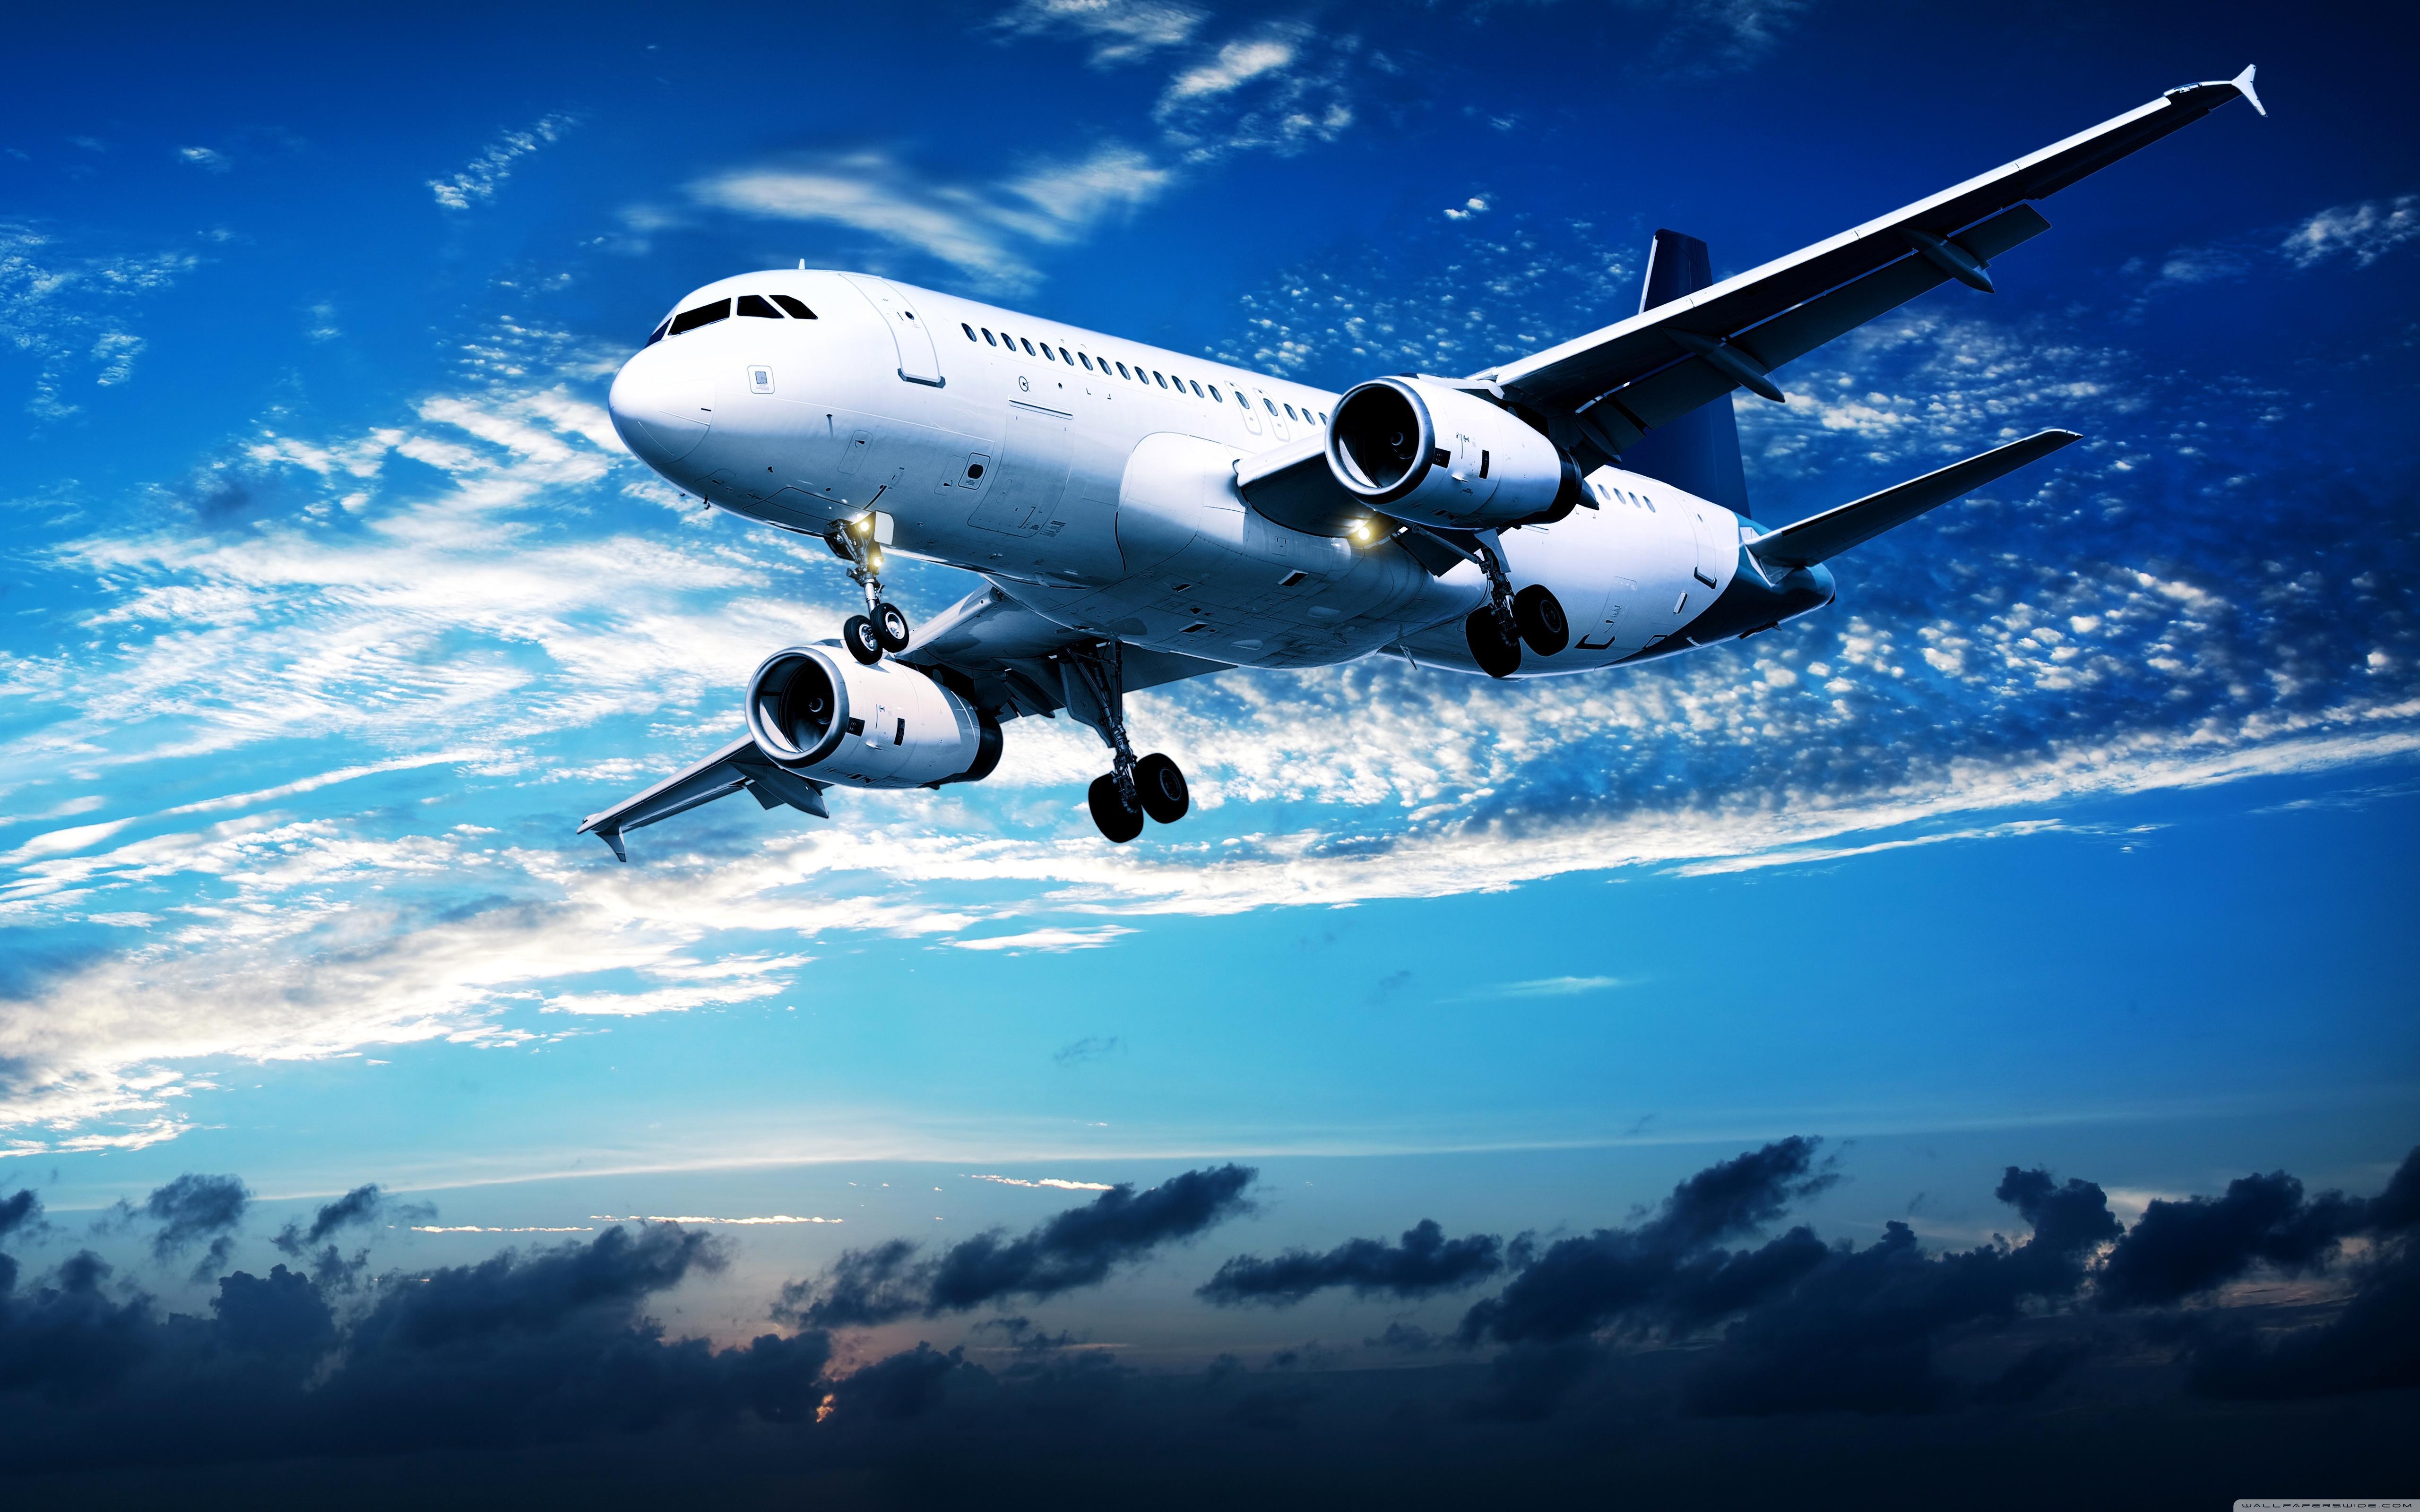 Repatriation Of Aircraft: Conflicts Between International Laws And Domestic Laws